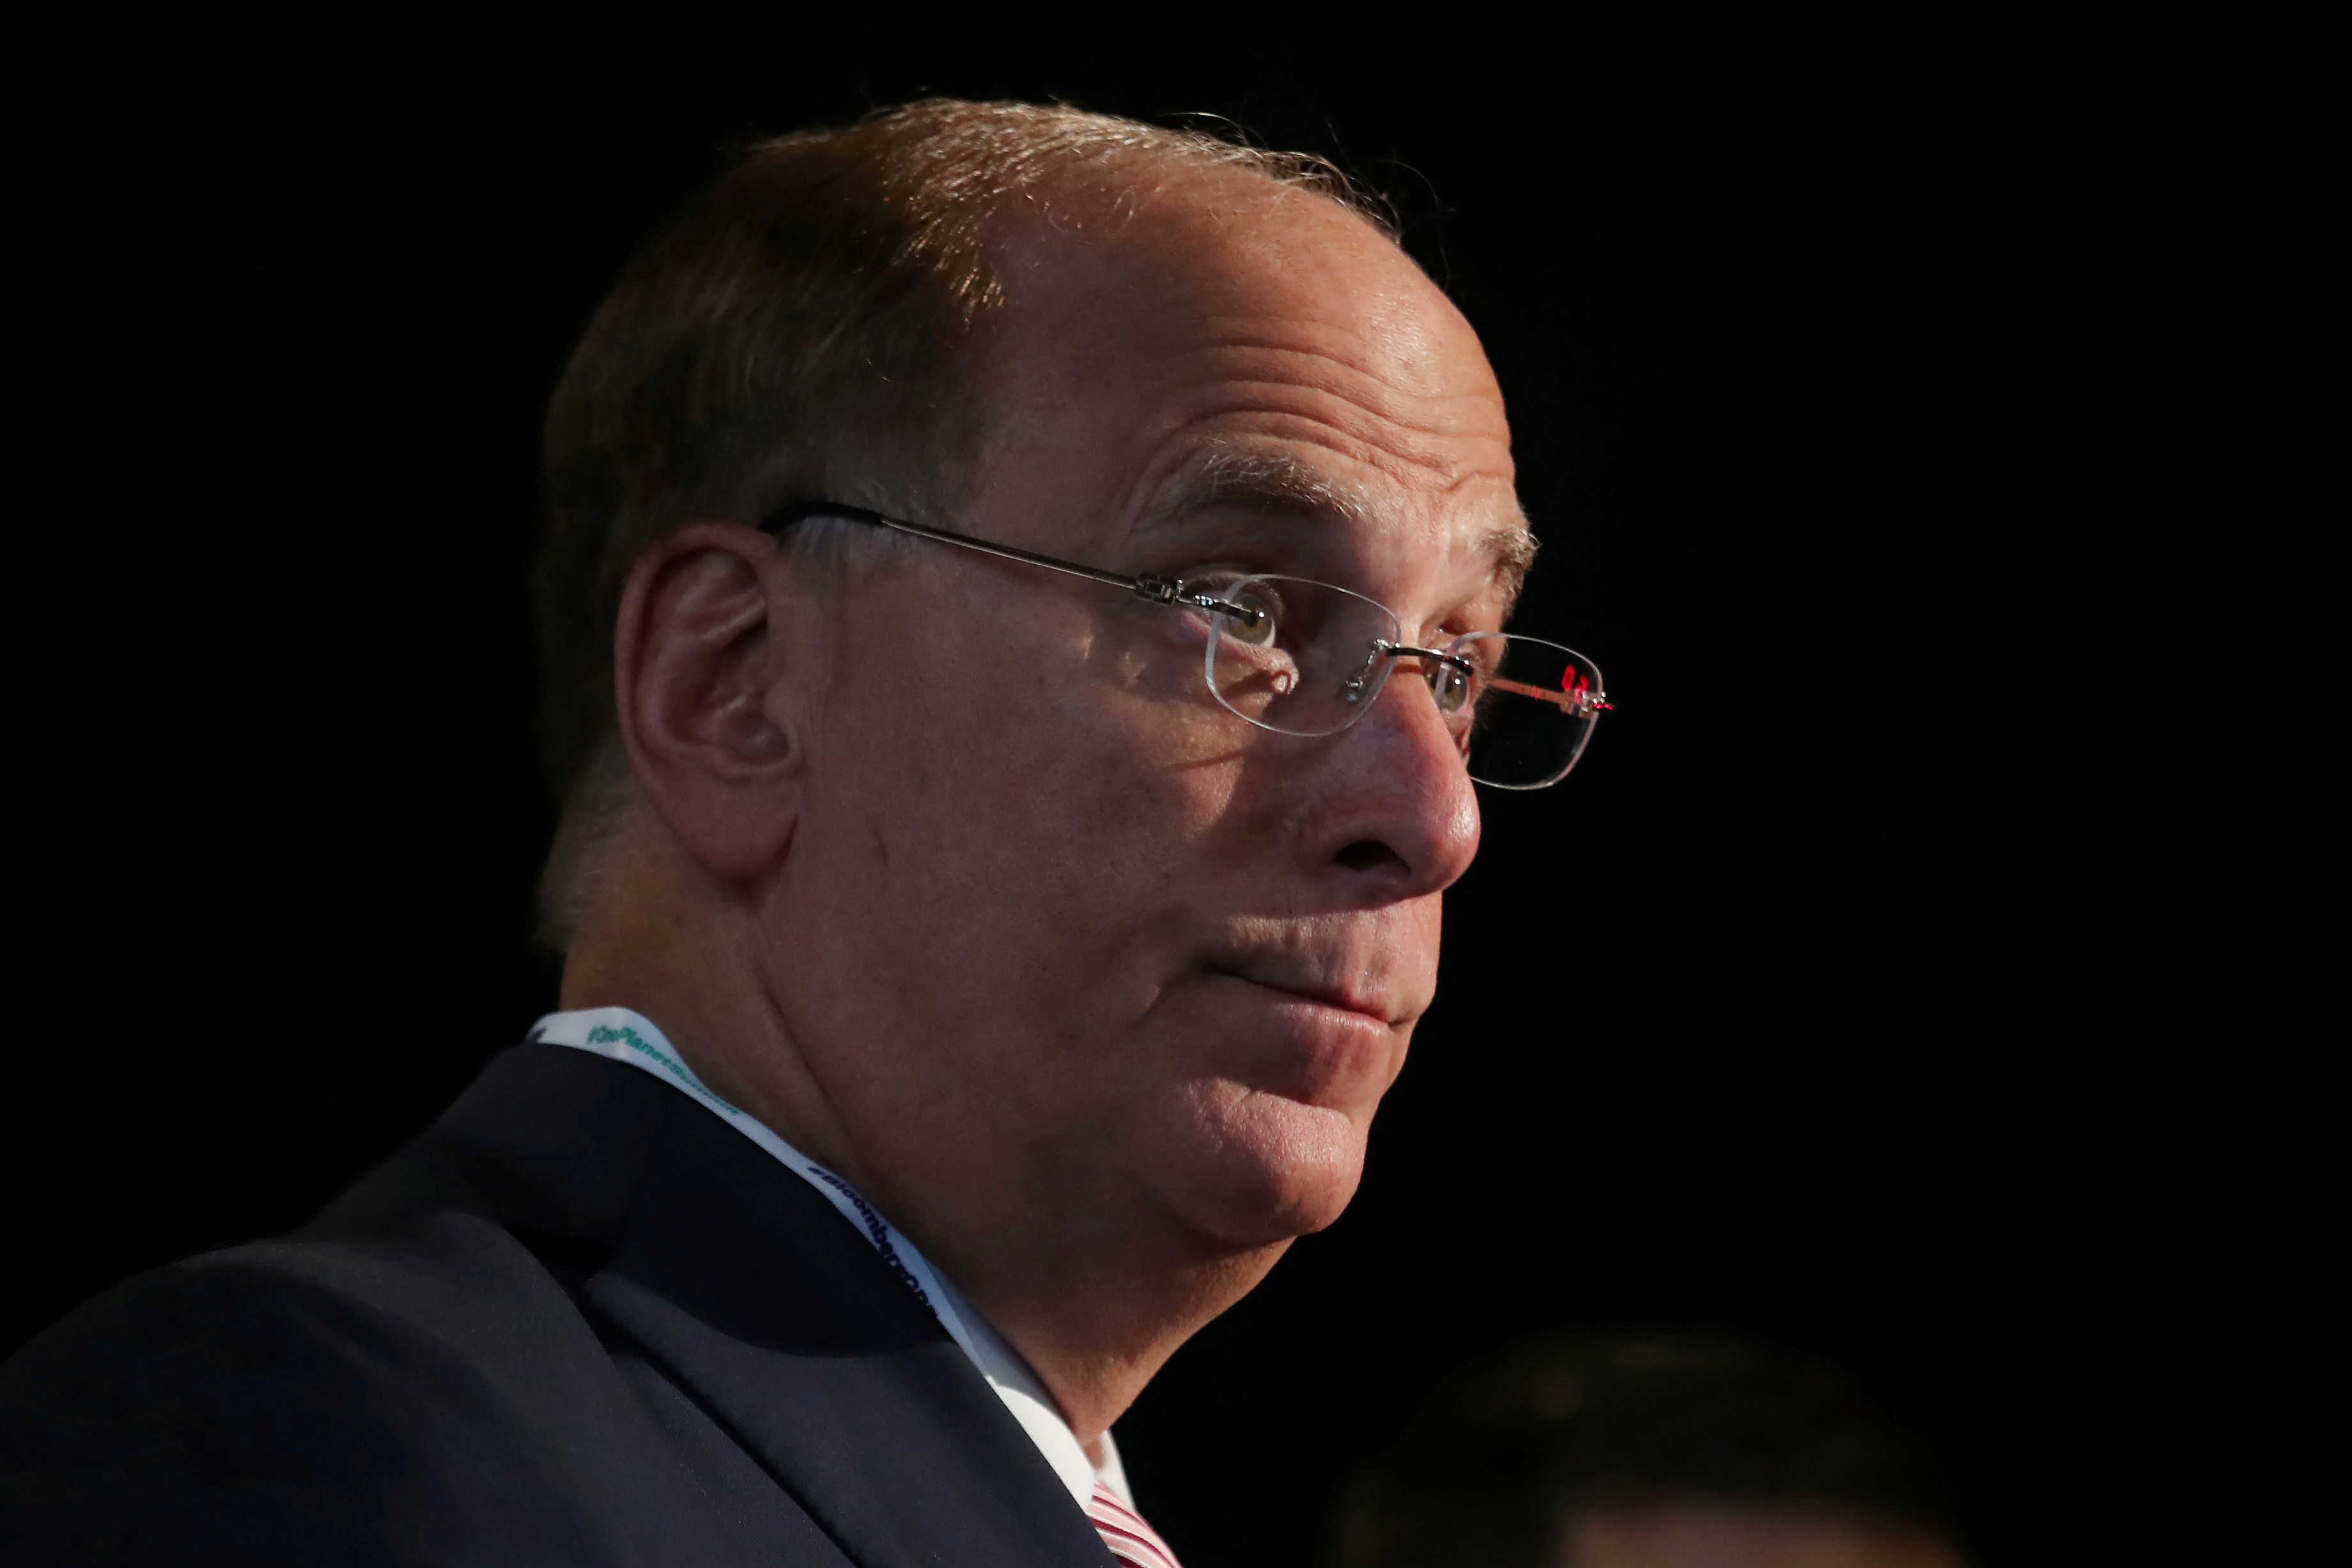 Larry Fink, Chief Executive Officer of BlackRock, stands at the Bloomberg Global Business forum in New York